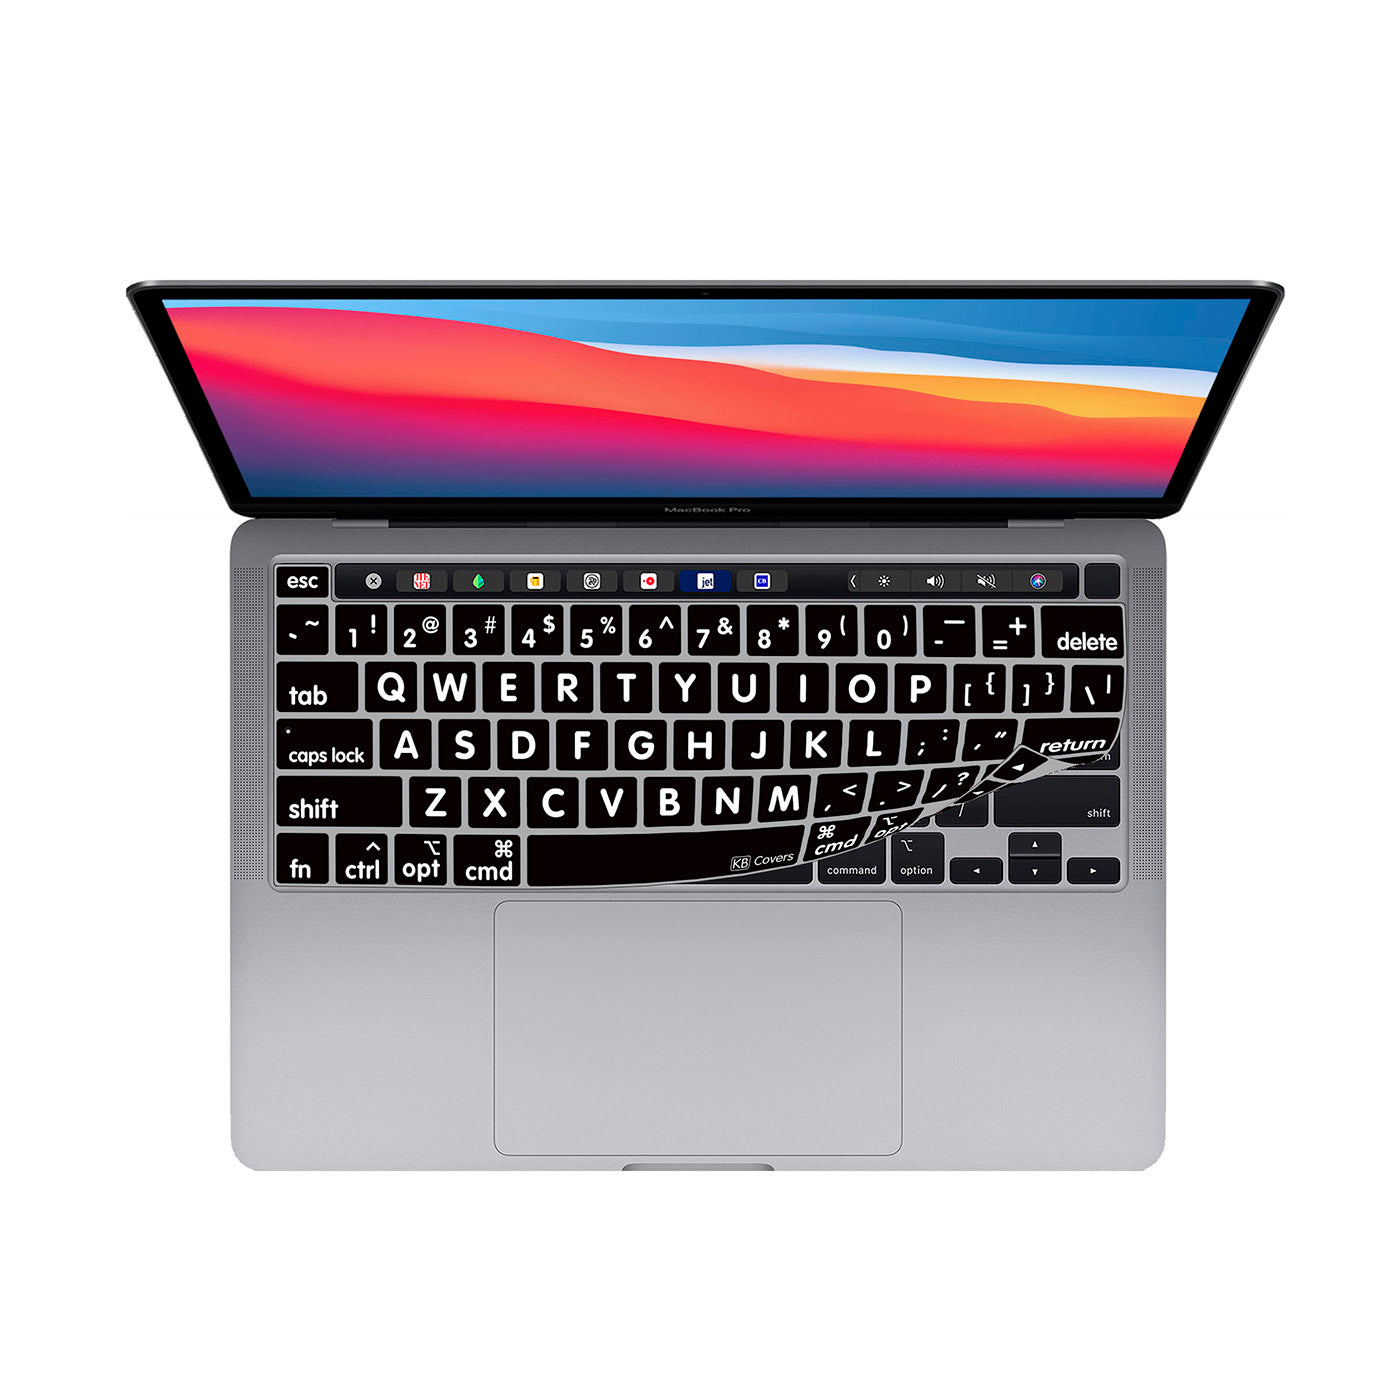 KB Covers Large Print Keyboard Cover for Macbook Pro 13-Inch & 16-Inch (2019)